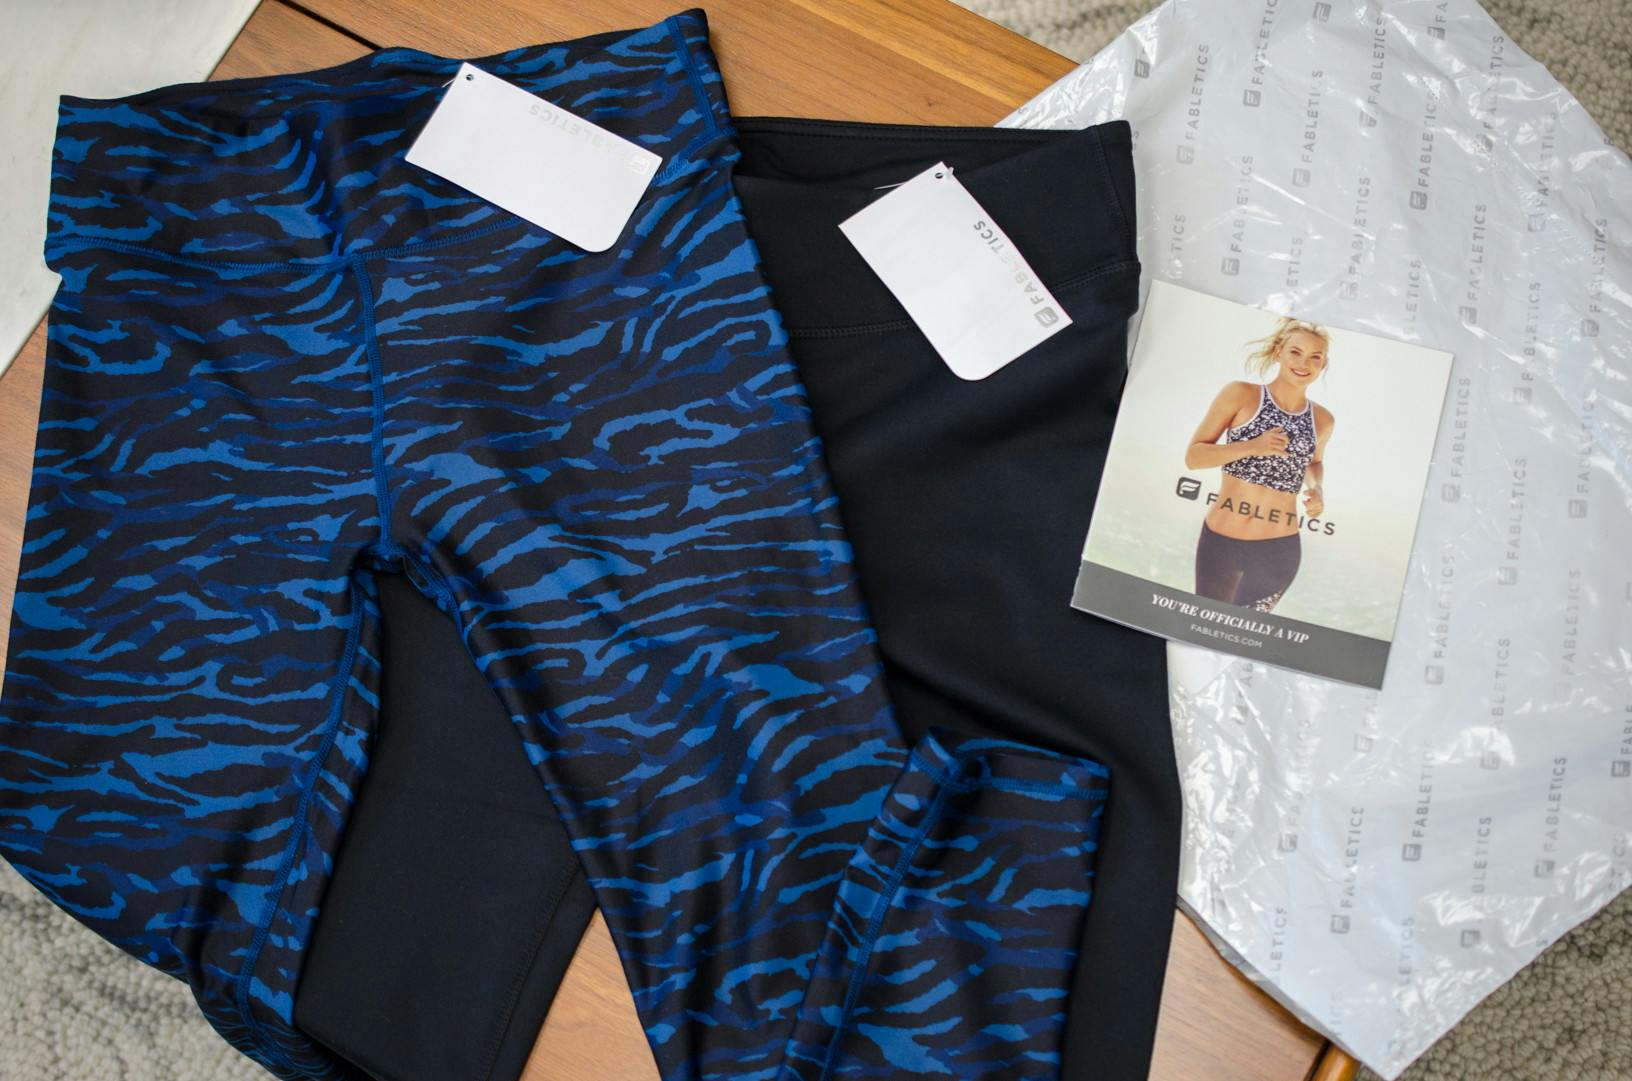 Fabletics New VIP Members In Canada Can Get 2 Leggings For $24 - Narcity